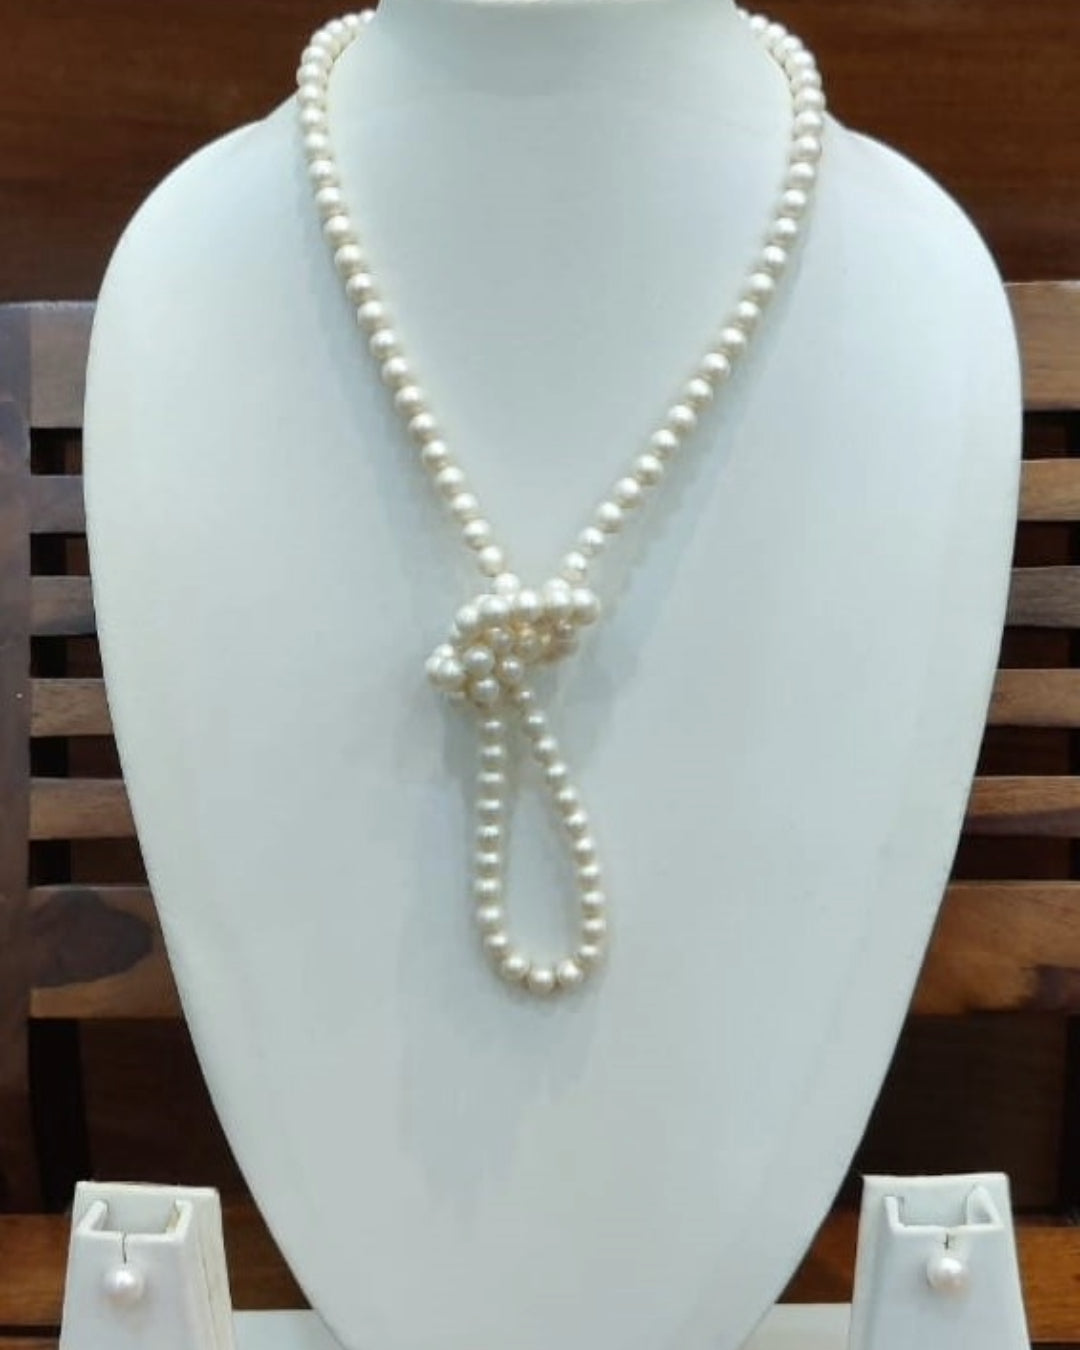 My Pearls 6 mm white Round Pearls Long Necklace Set